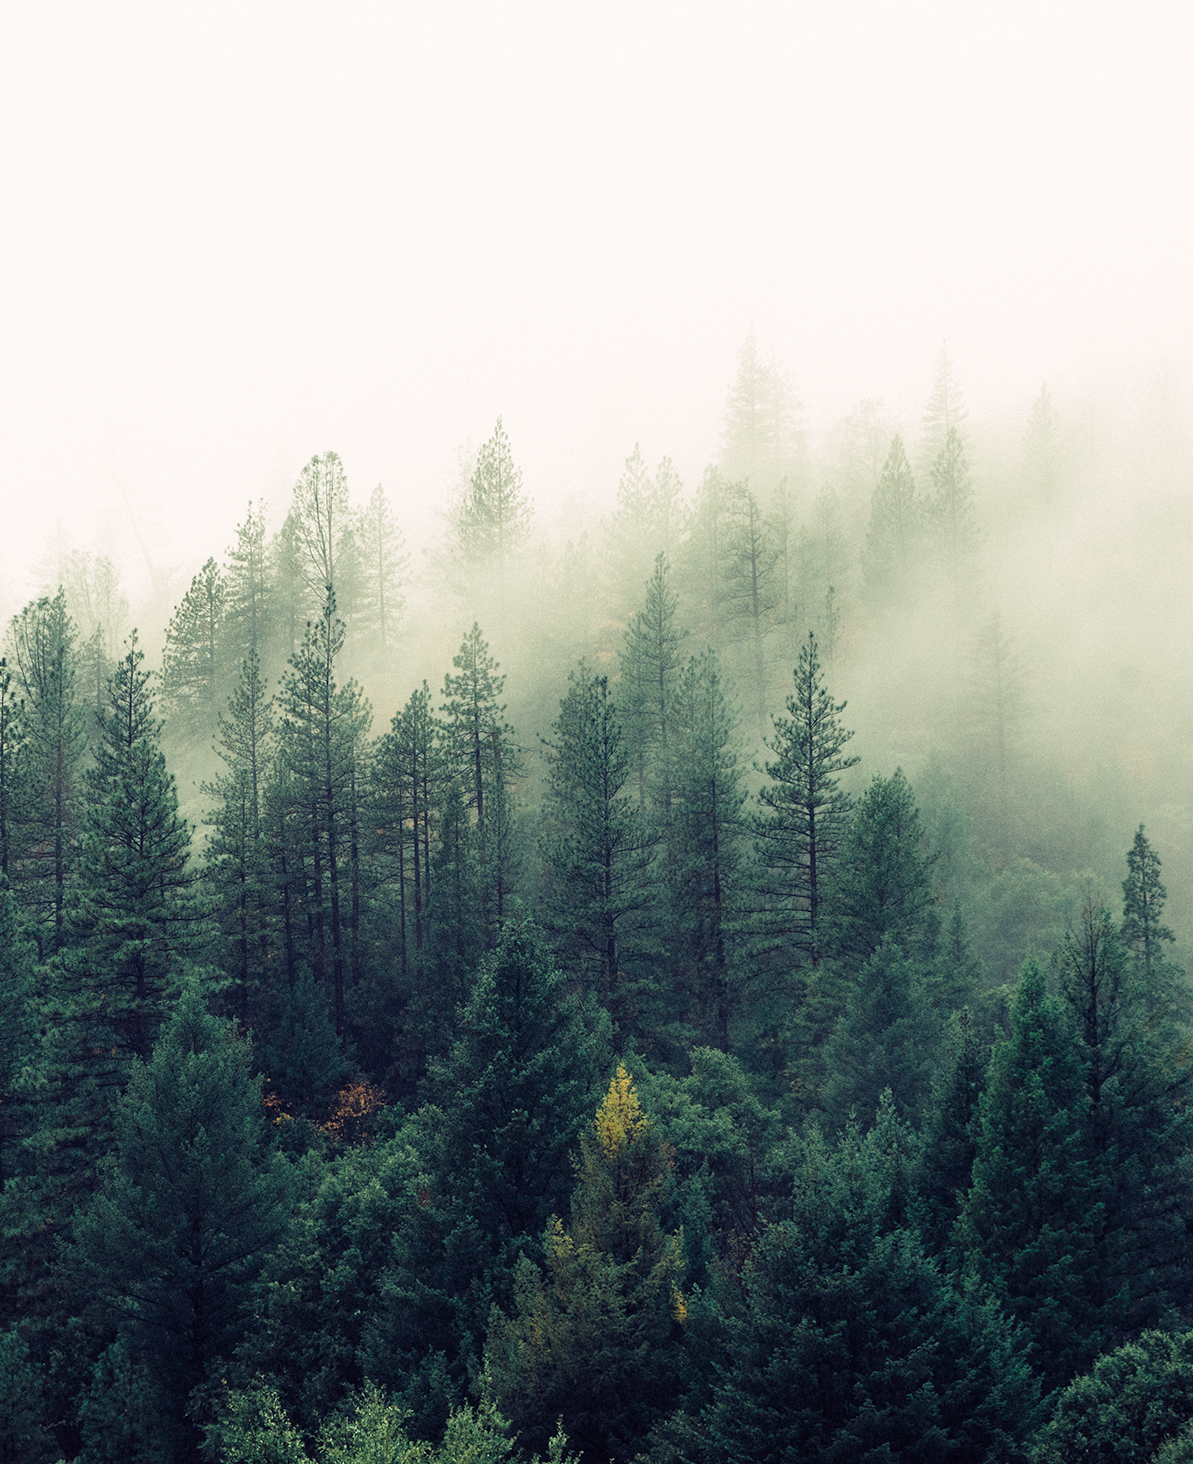 Image of a foggy evergreen forest